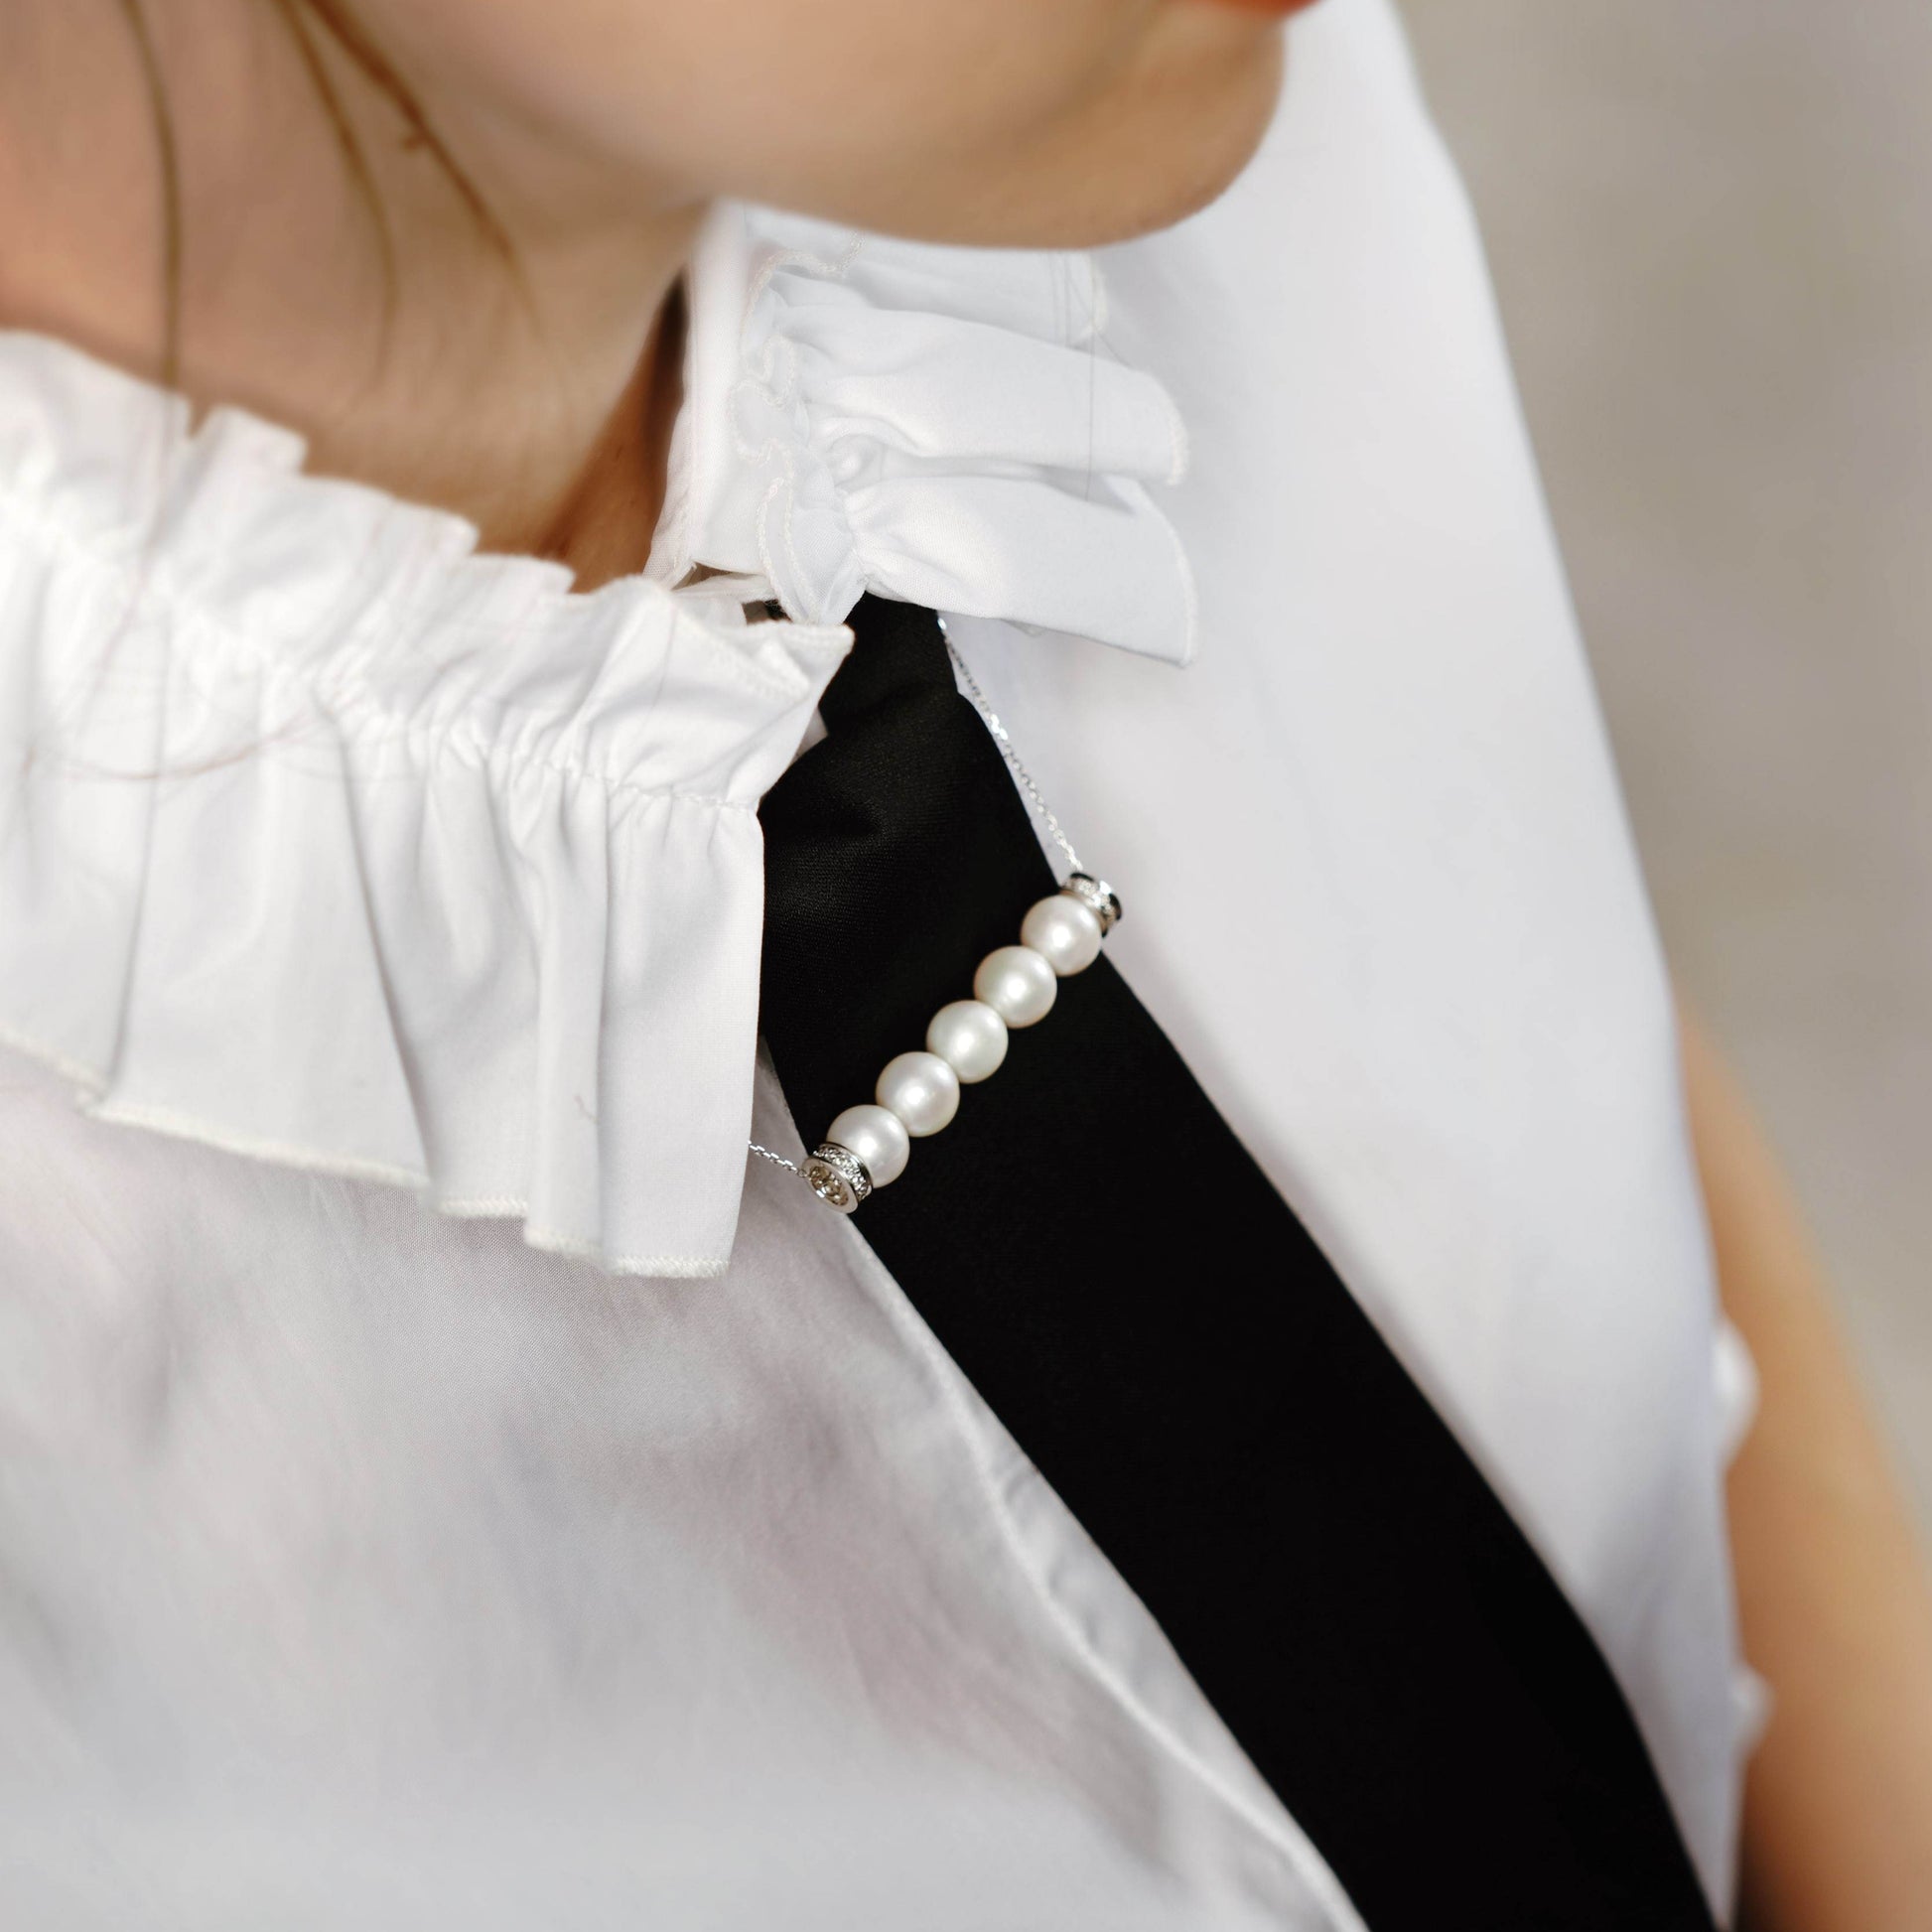 Chic woman wearing white shirt and stunning Parallel Pearl Necklace.